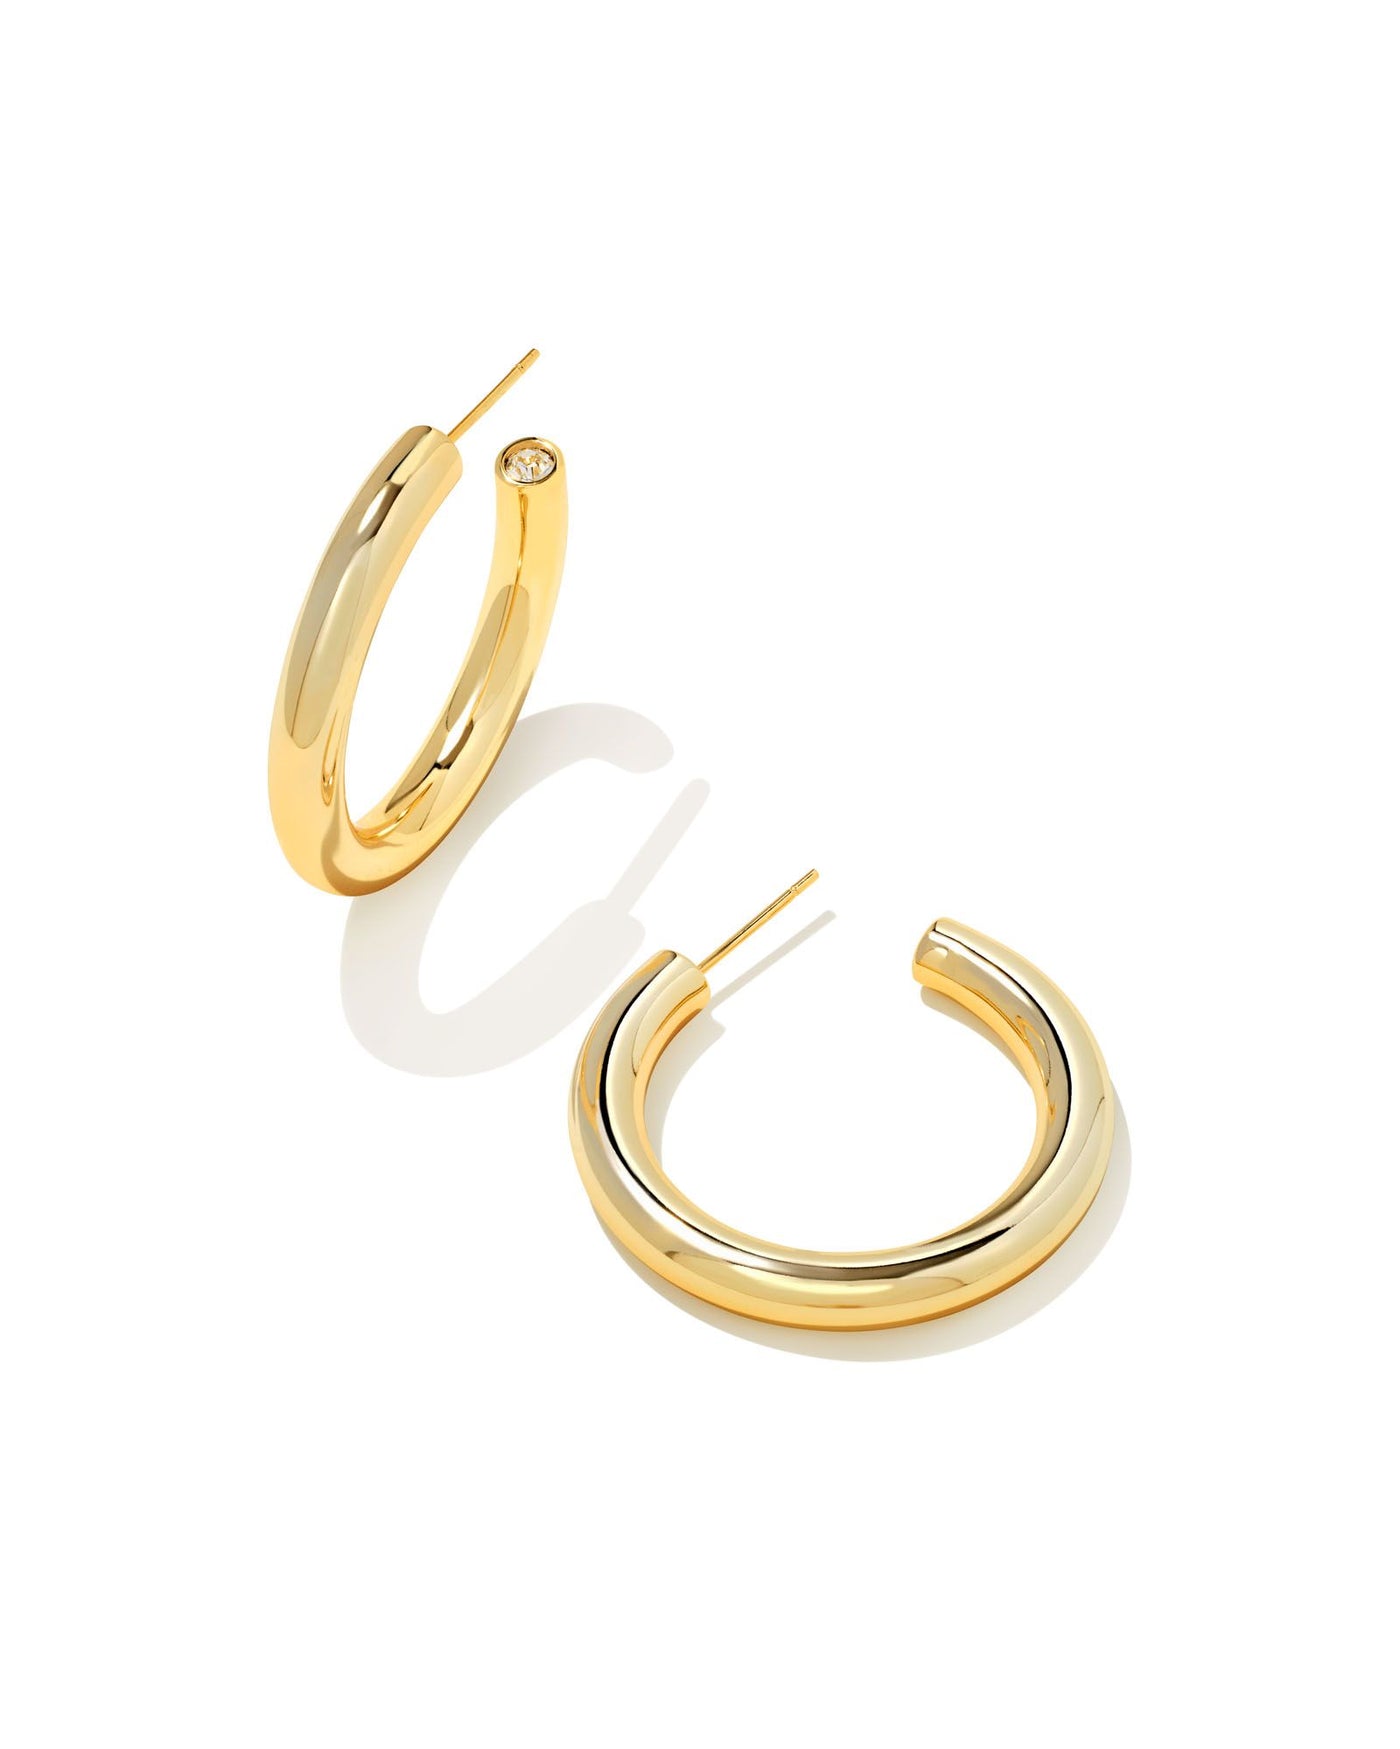 Kendra Scott Colette Hoop Earrings in Gold-Earrings-Kendra Scott-Market Street Nest, Fashionable Clothing, Shoes and Home Décor Located in Mabank, TX